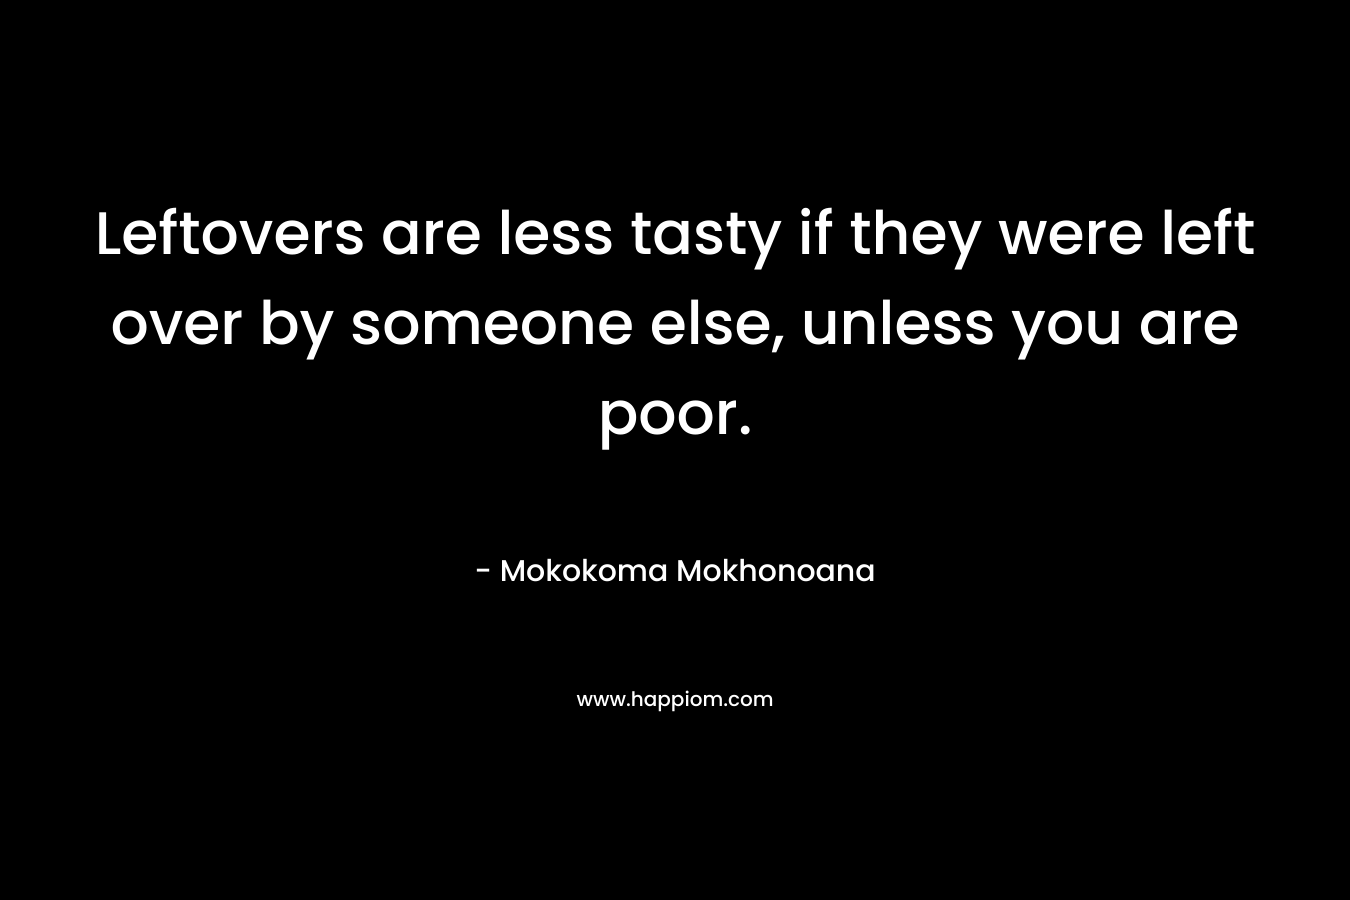 Leftovers are less tasty if they were left over by someone else, unless you are poor. – Mokokoma Mokhonoana